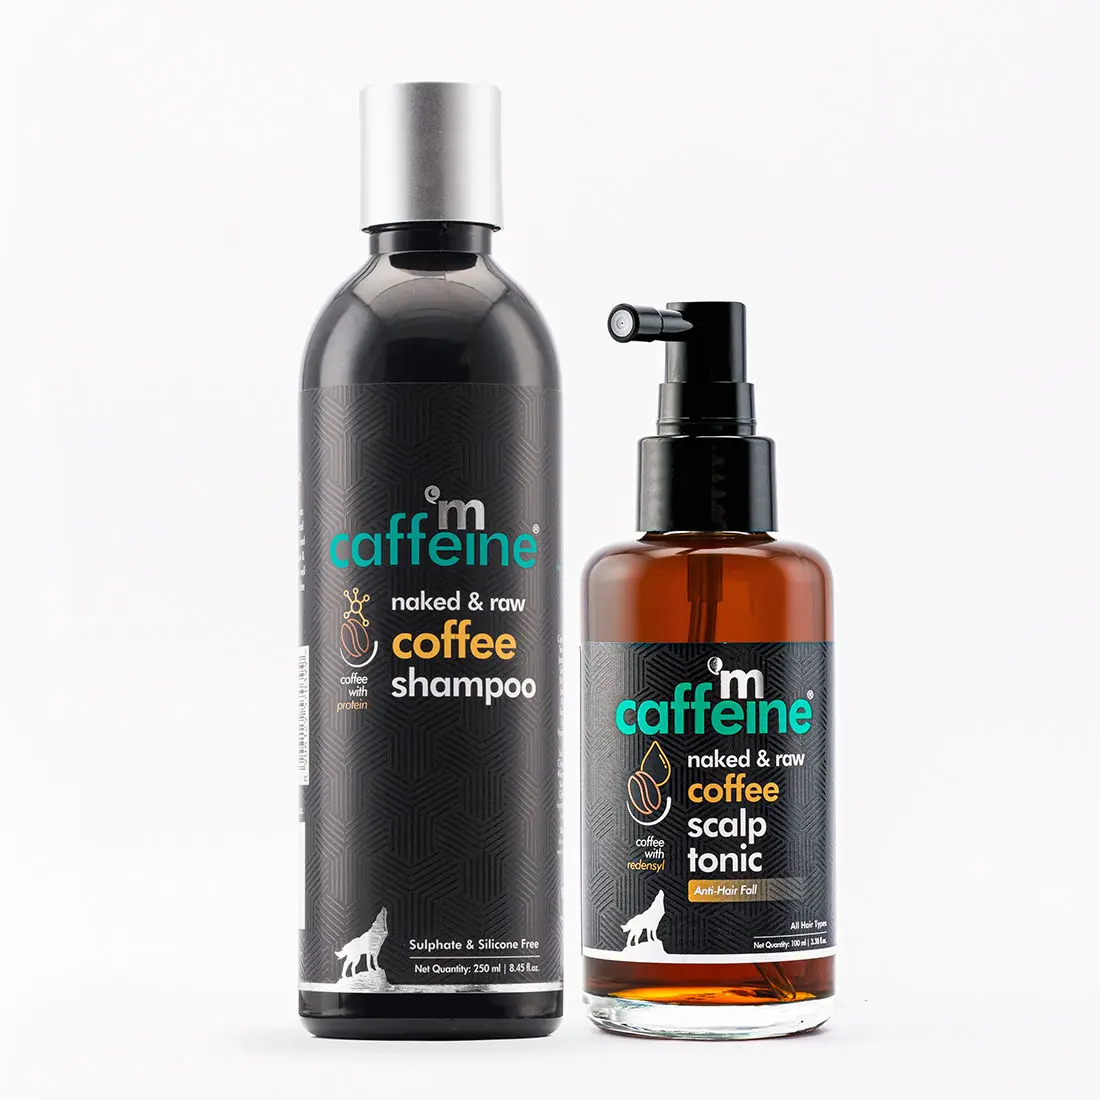 mCaffeine Coffee Hair Boost & Hair Fall Control Kit | Shampoo & Scalp Tonic with Pro-vitamin B5 & Proteins | Sulphate, Paraben & Mineral Oil Free | For Men & Women 350 ml